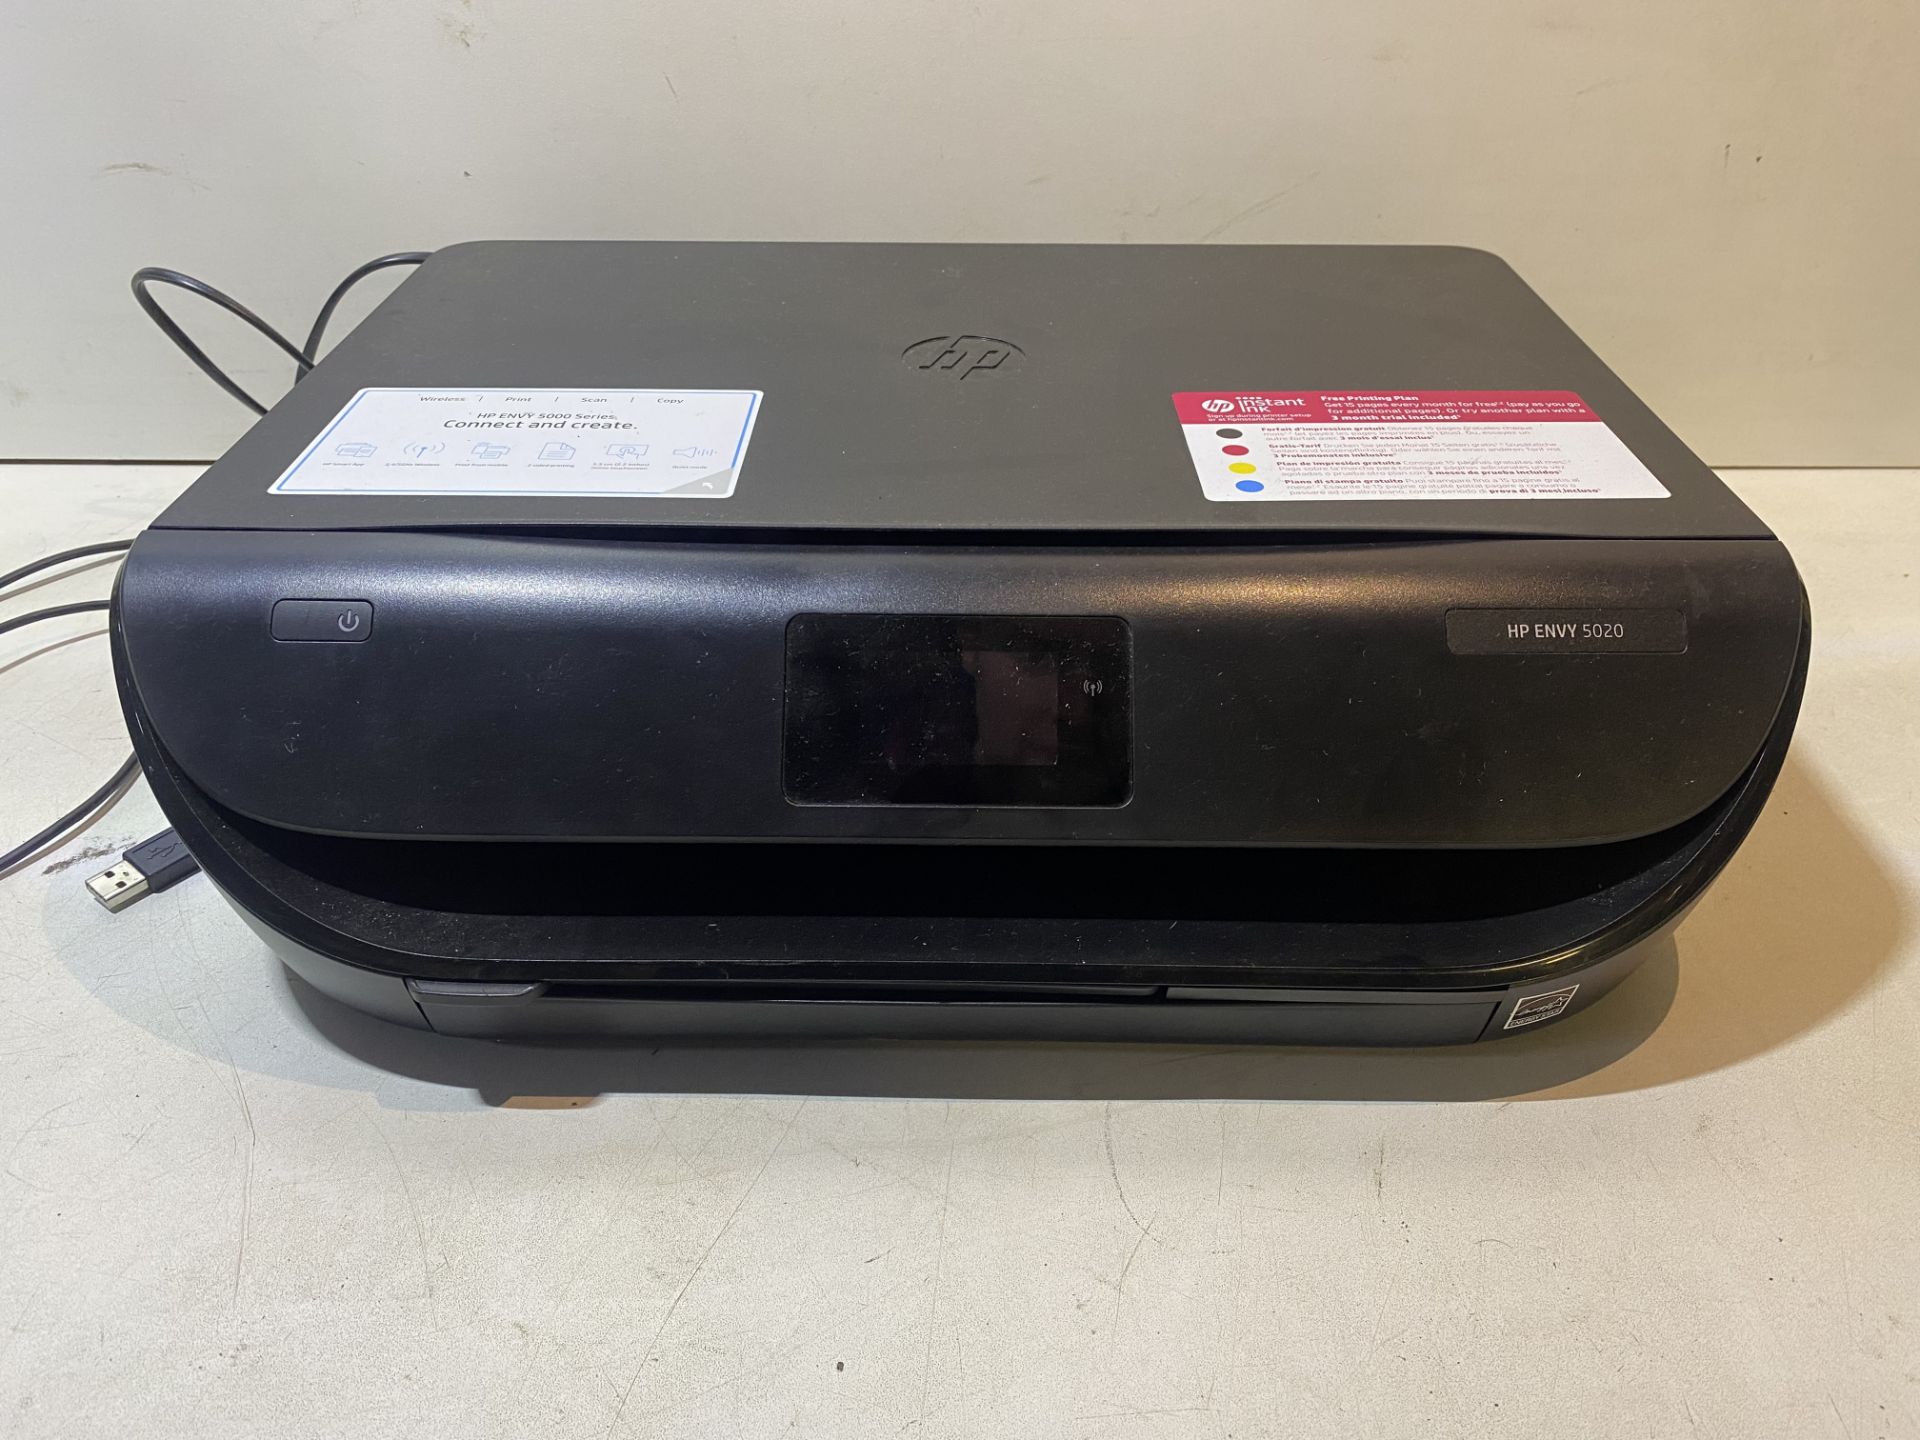 HP ENVY 5020 All-in-One Printer - Image 2 of 9